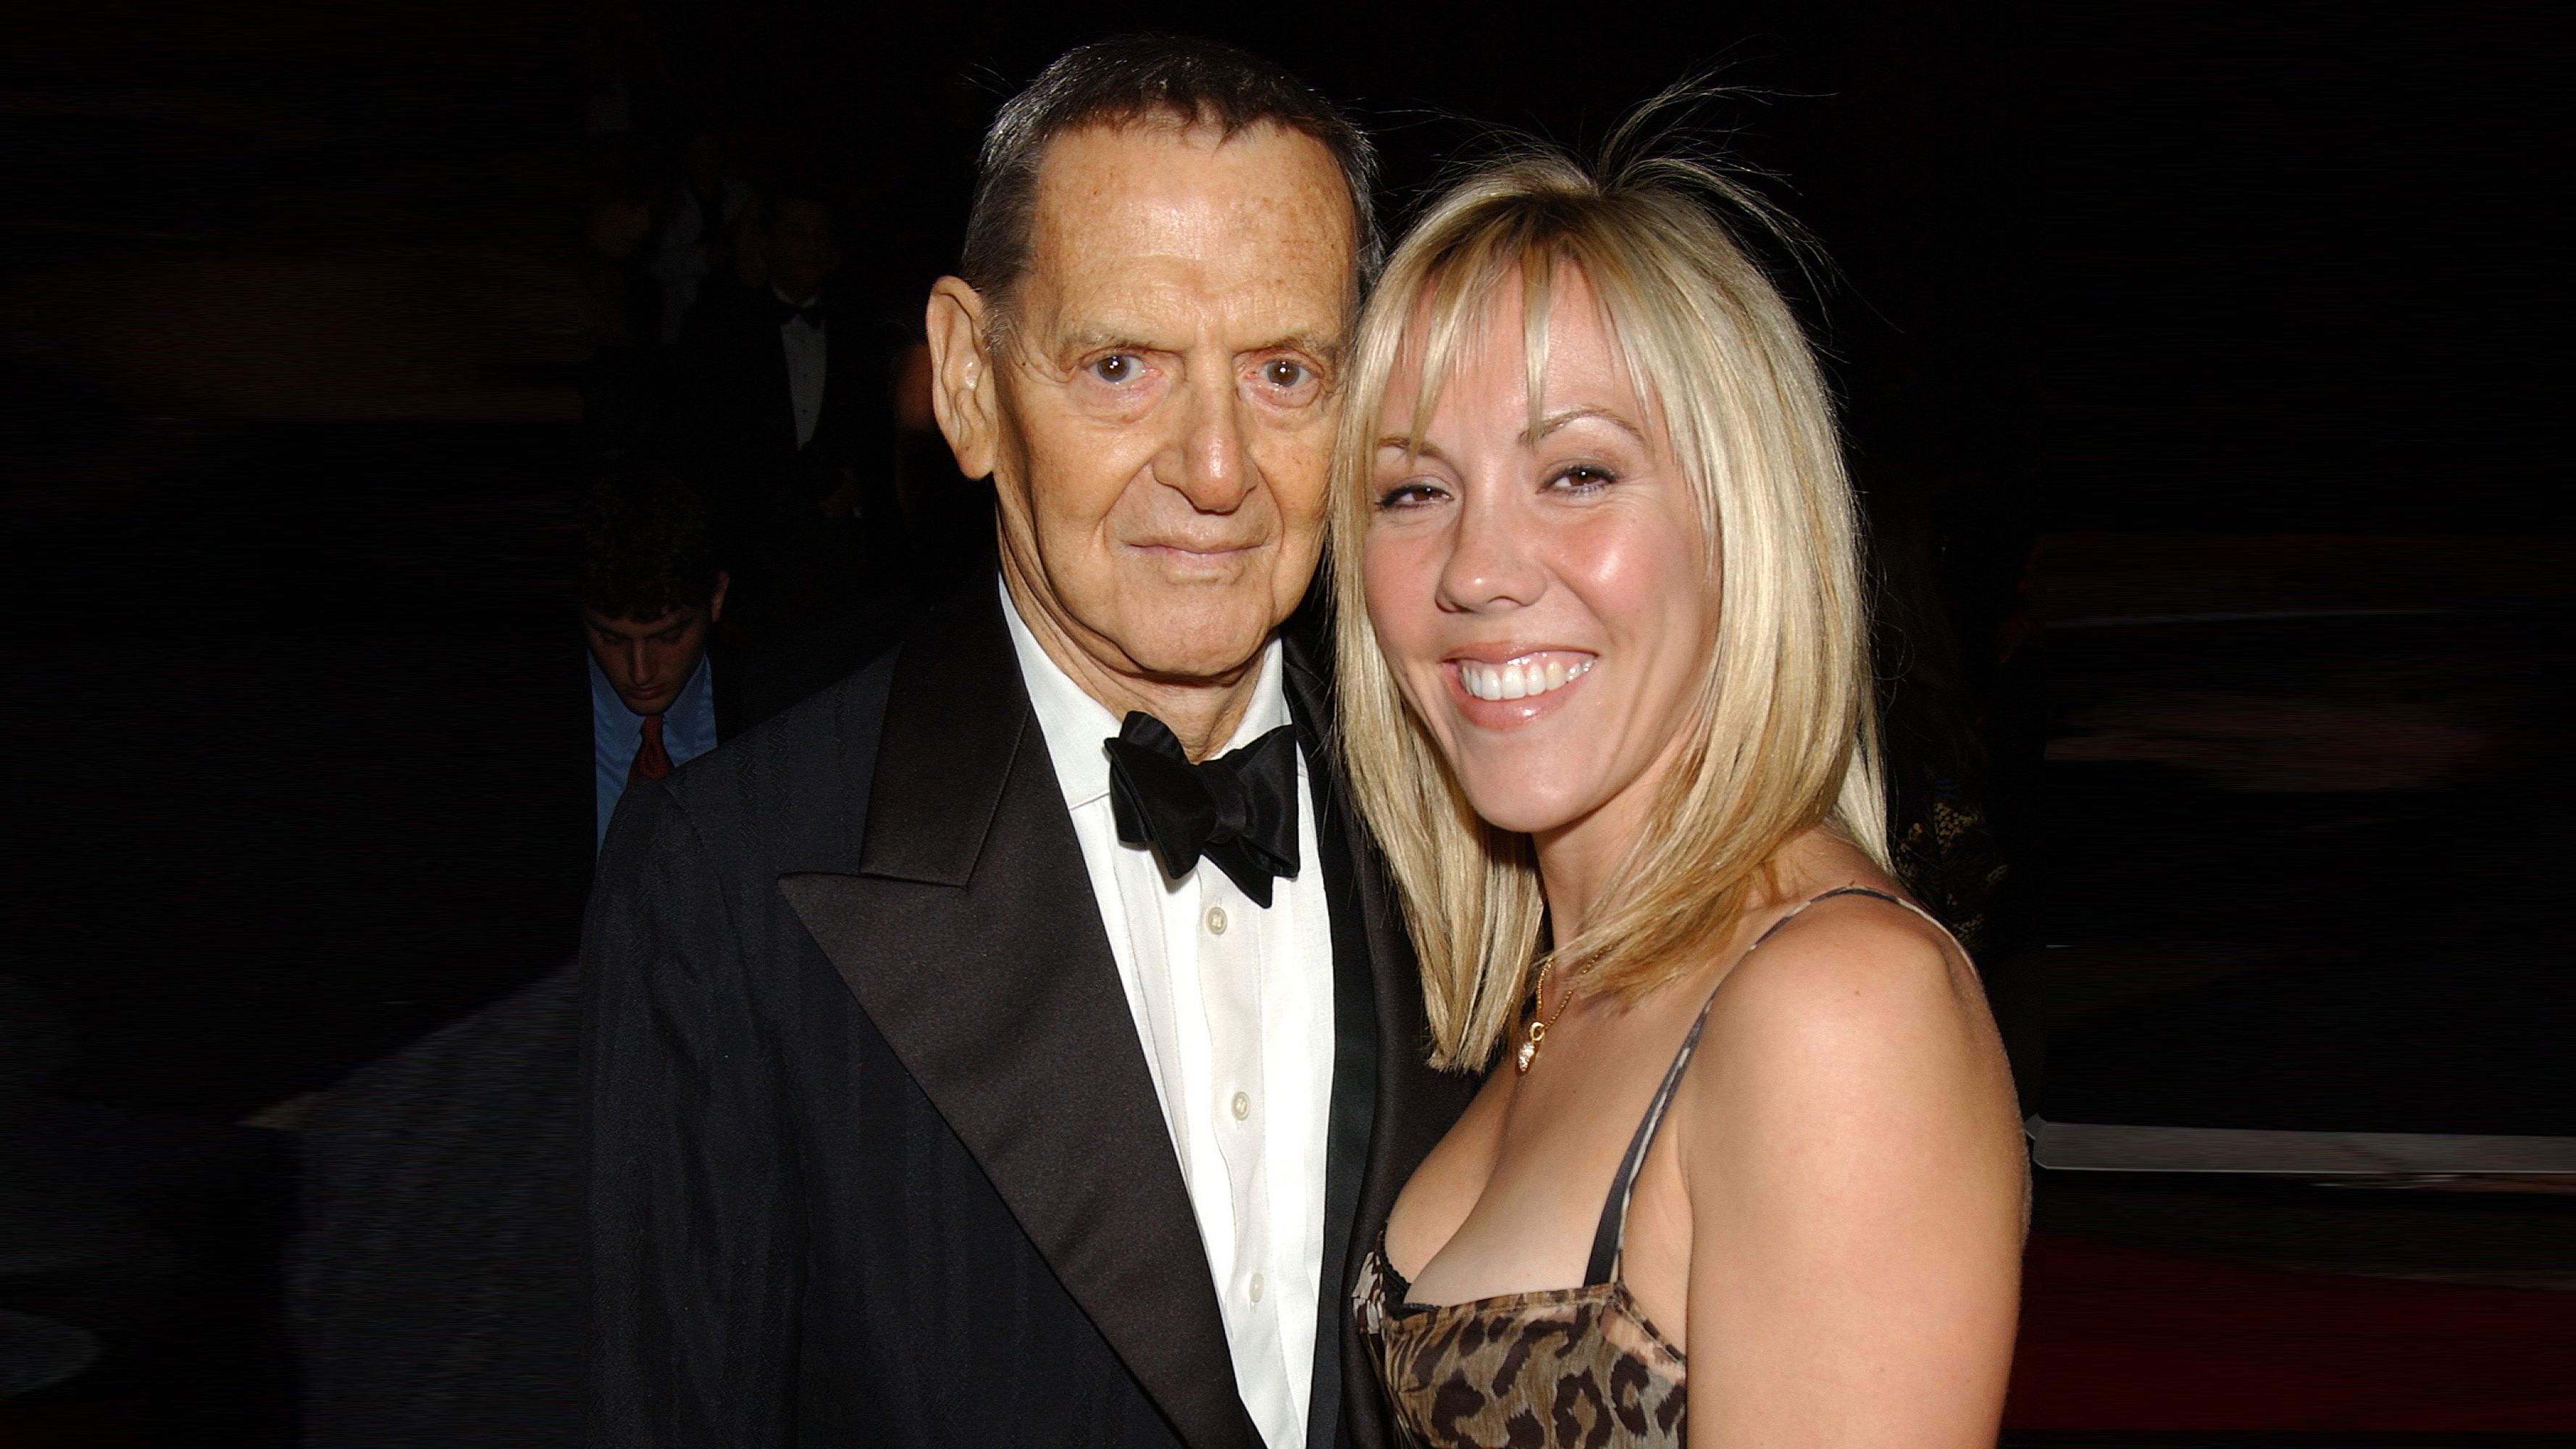 Heather Randall, Wife of Tony Randall The Marie Claire Interview Marie Claire pic image